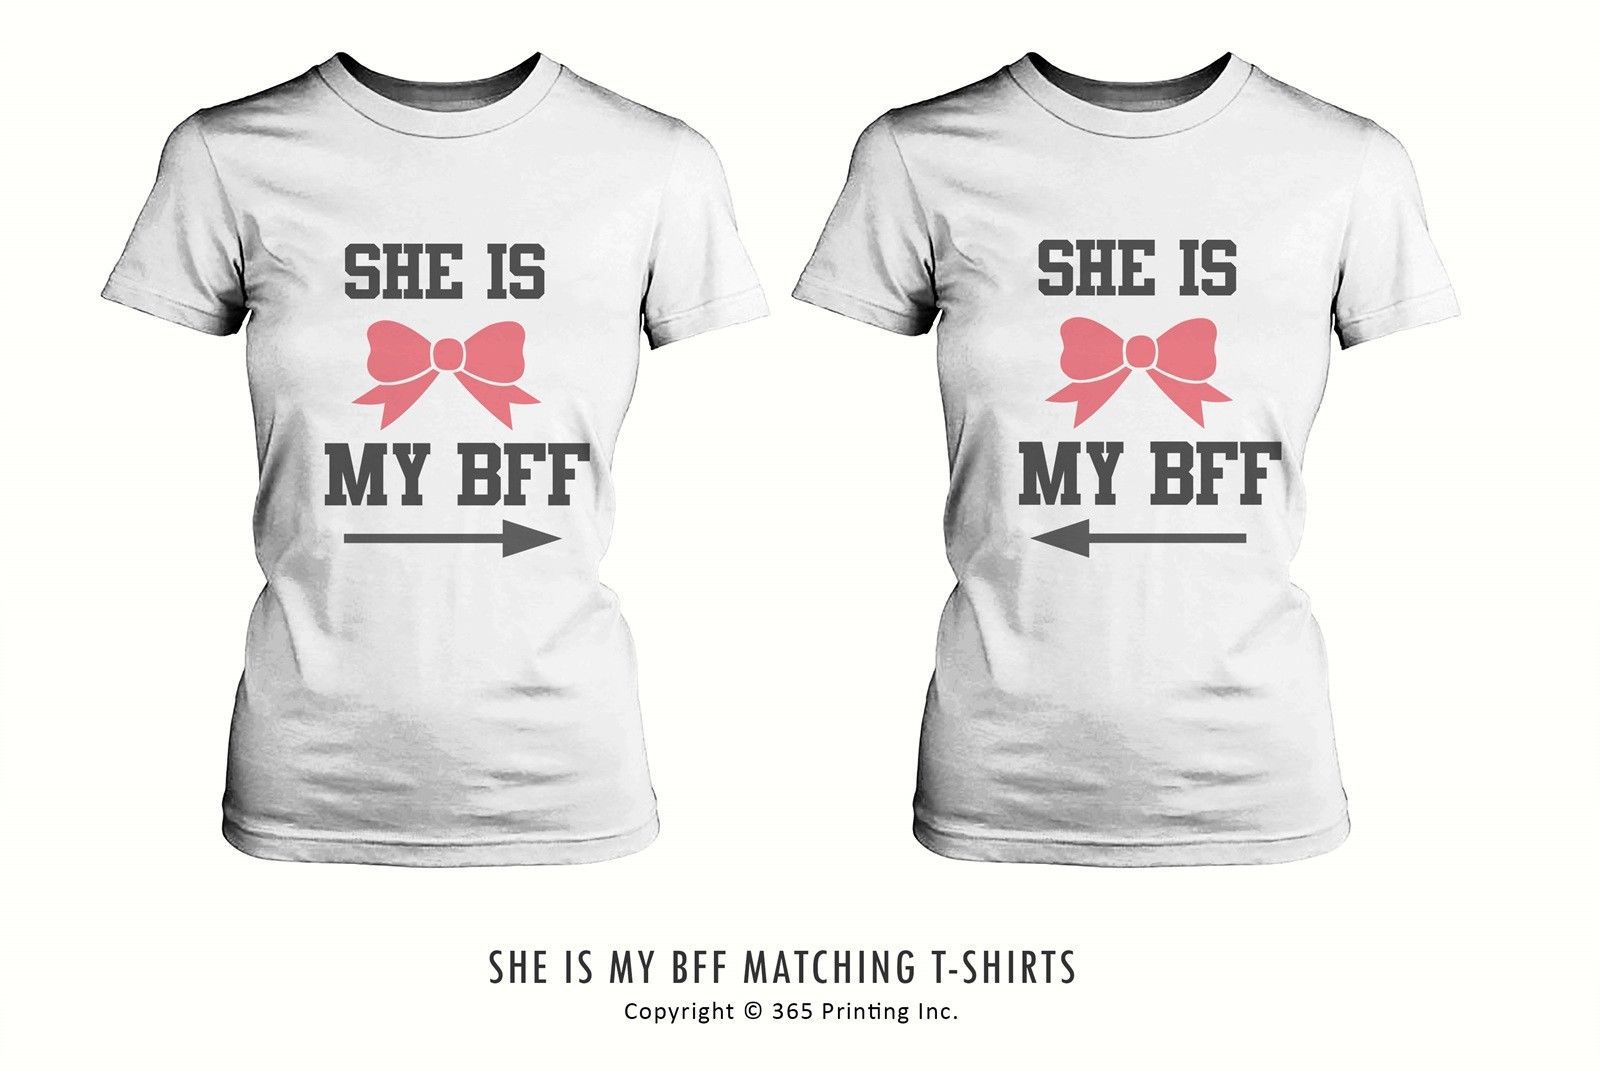 Best Friend Matching Shirts Shes My Bff T Shirts For Bff T Shirts And Tank Tops